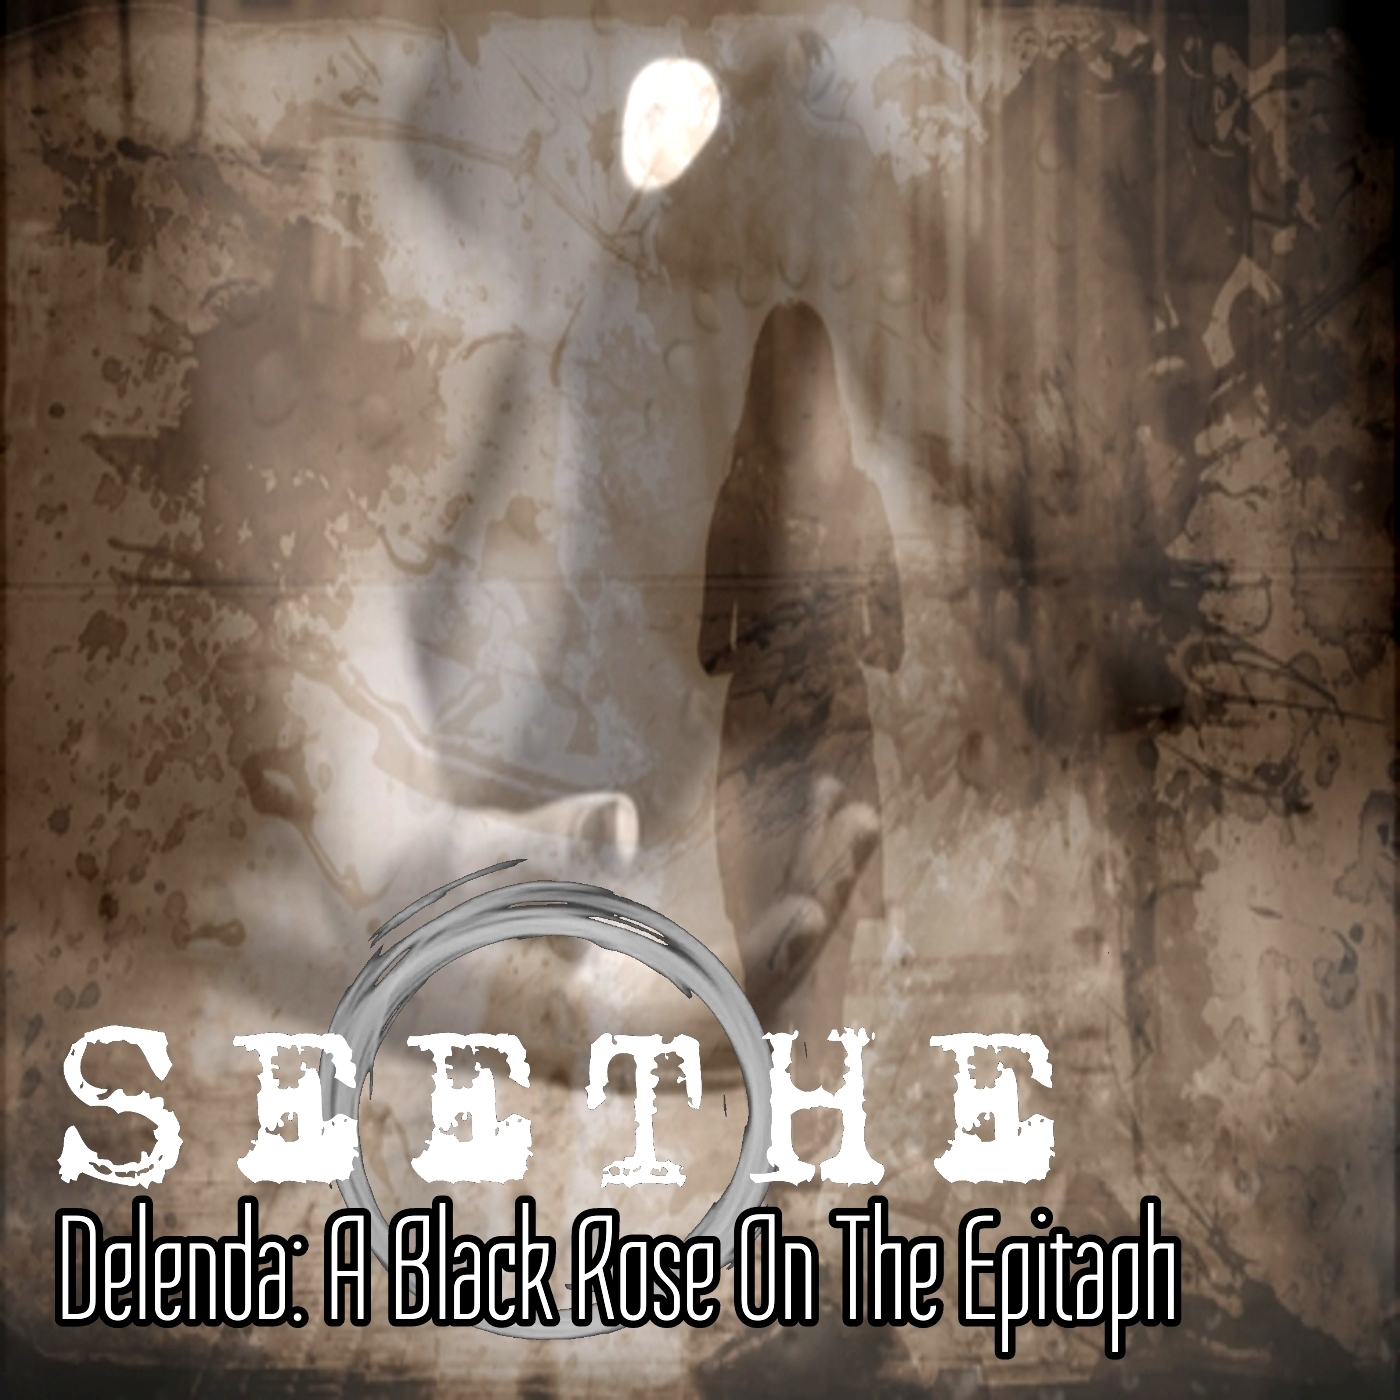 ALBUM REVIEW: Delenda: A Black Rose on the Epitaph by Seethe